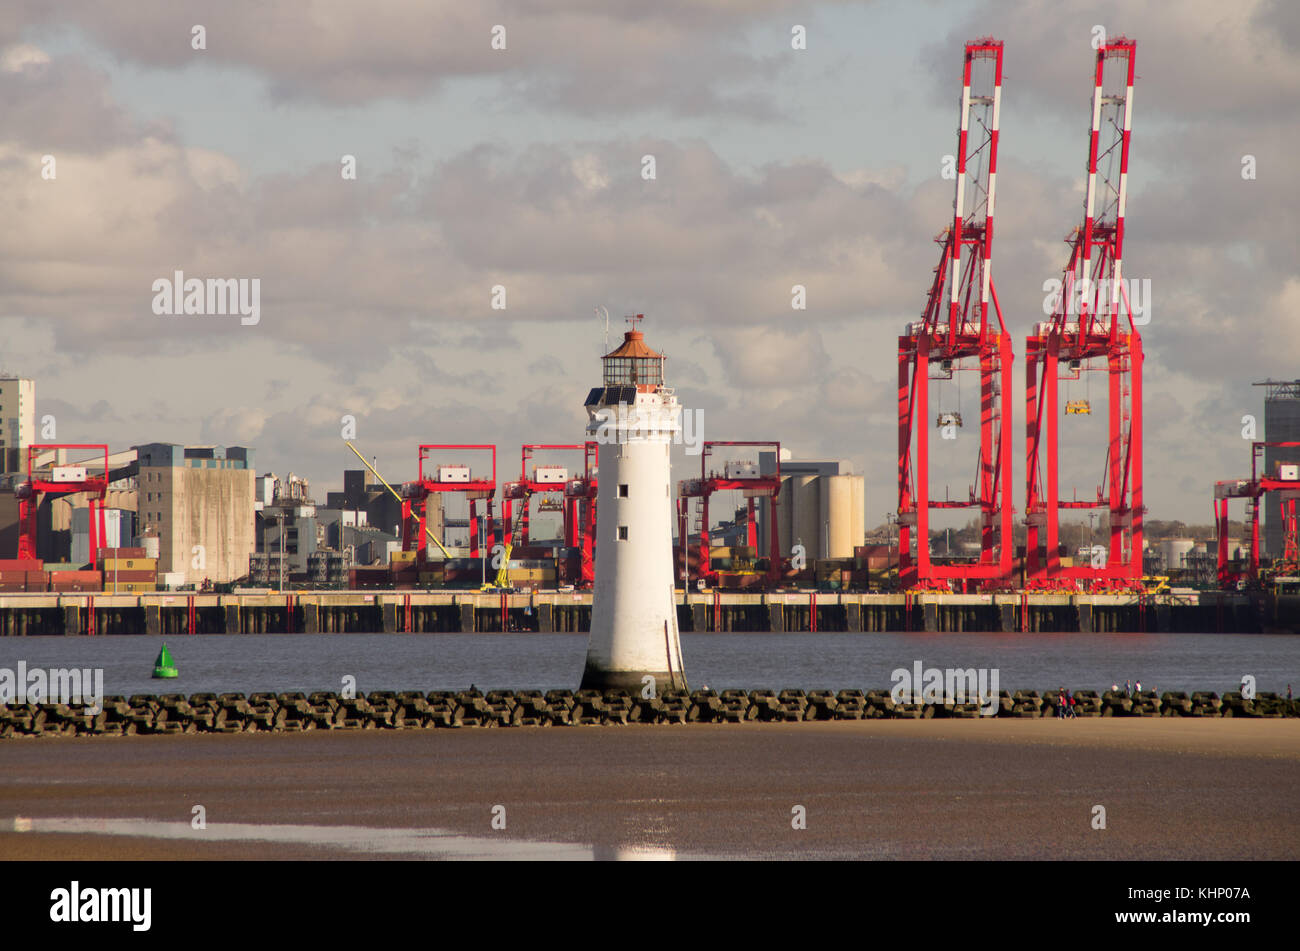 Royal Seaforth Dock Liverpool and Perch Rock lighthouse New Brighton Stock Photo